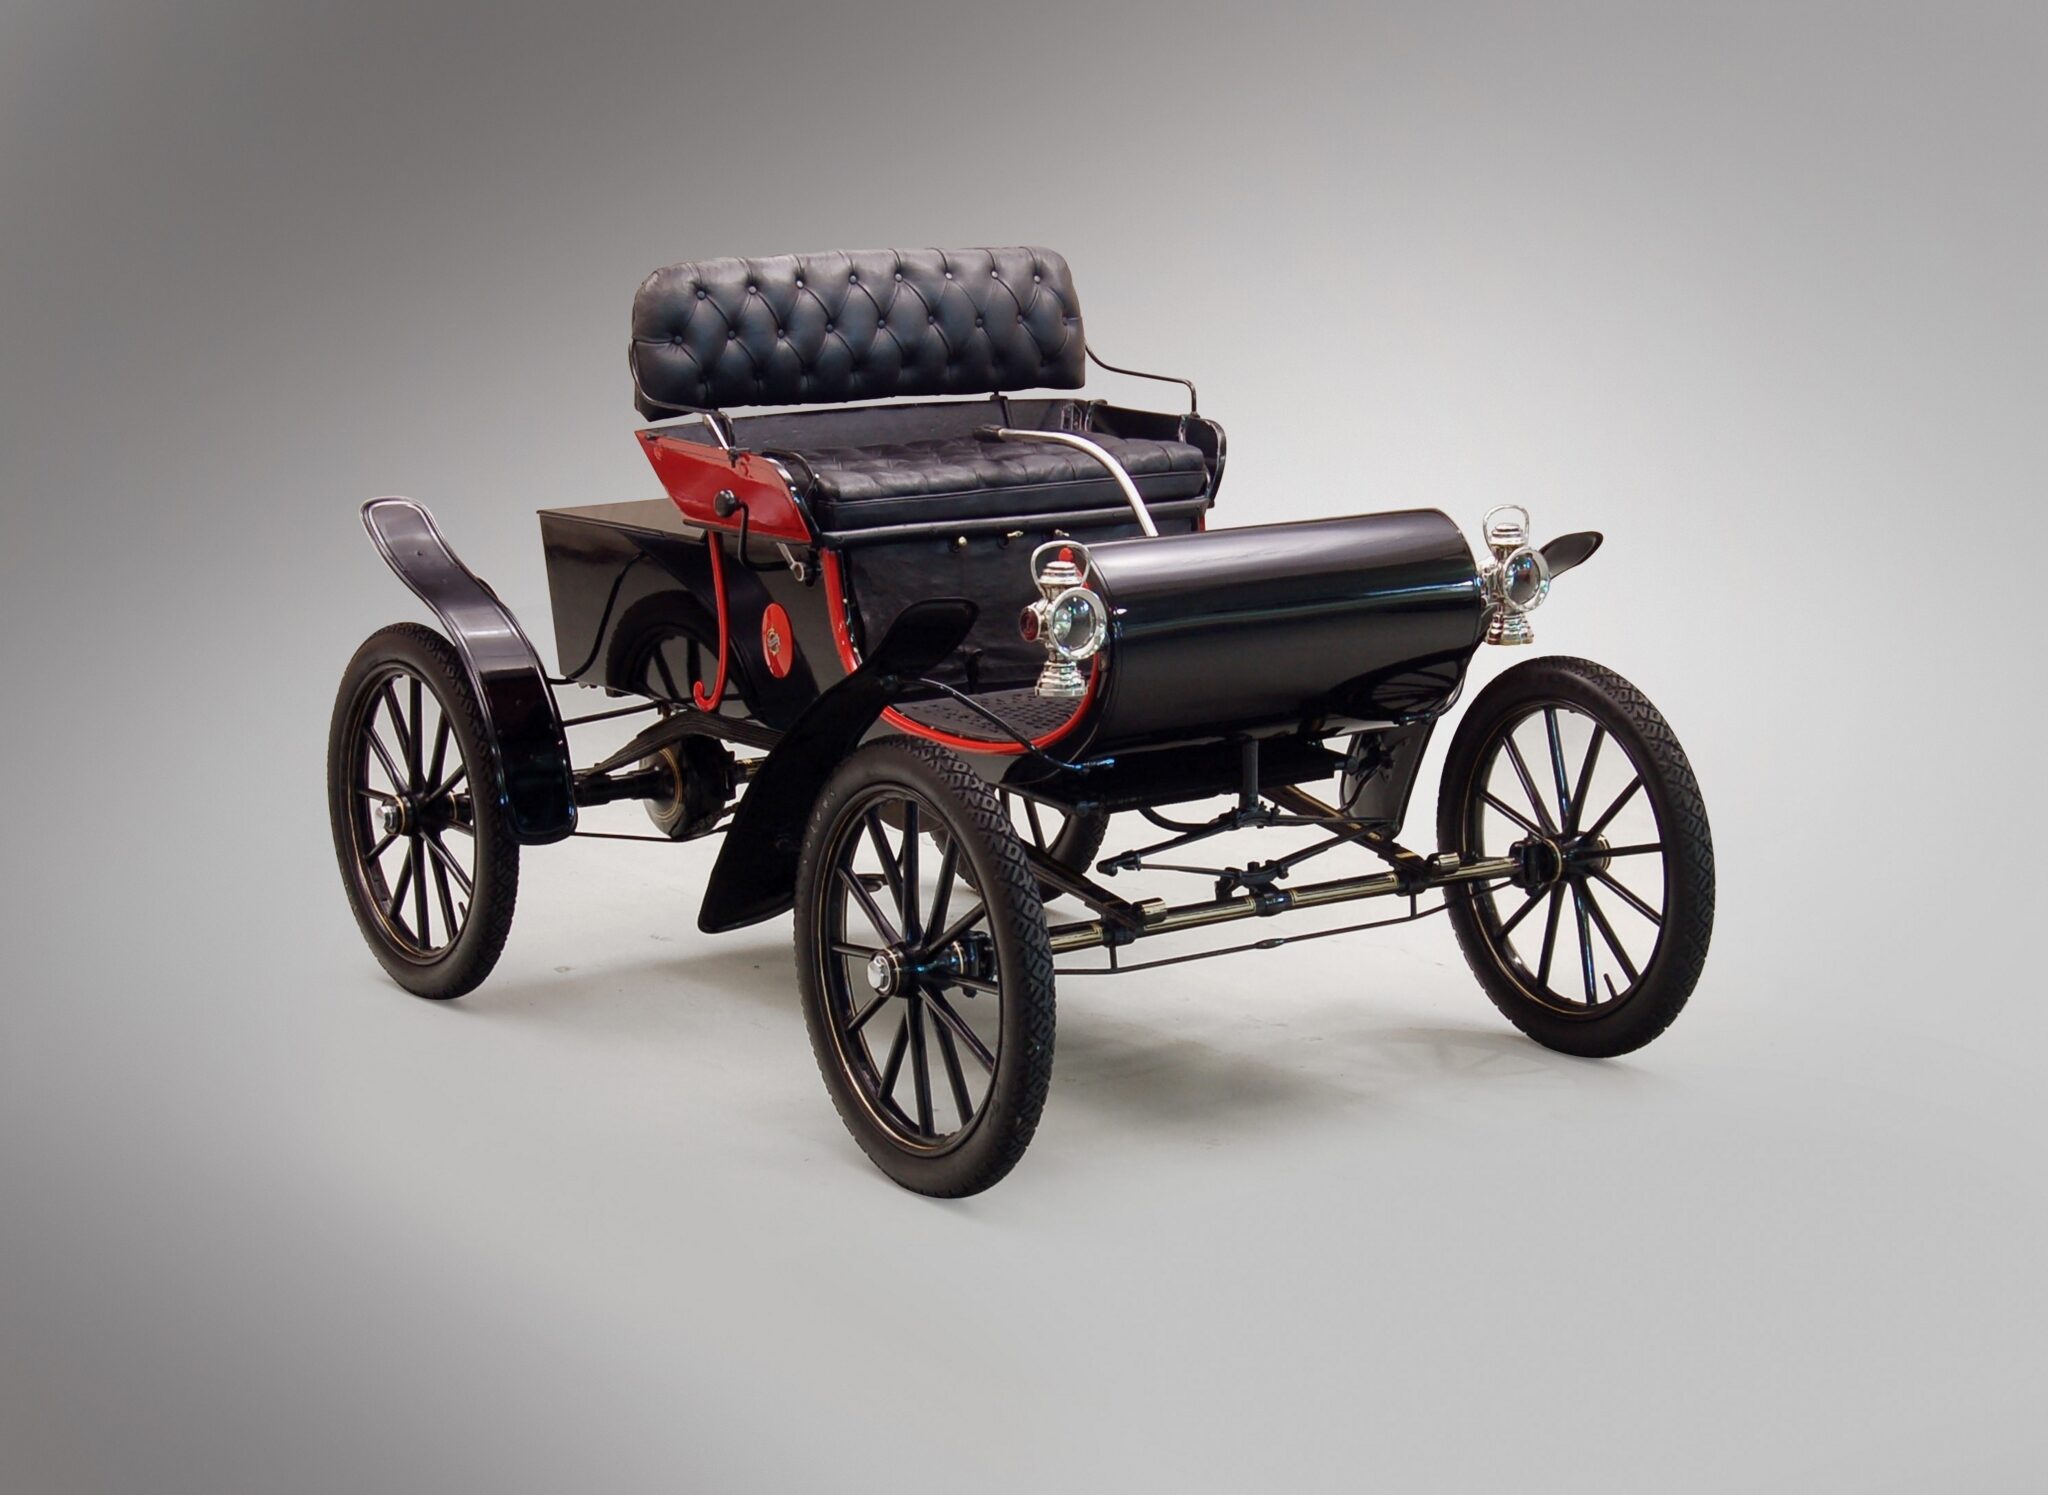 1901 Oldsmobile Model R ‘Curved Dash’ Runabout, 1901 Oldsmobile Model R 'Curved Dash' Runabout, Oldsmobile, Oldsmobile Model Curved Dash'